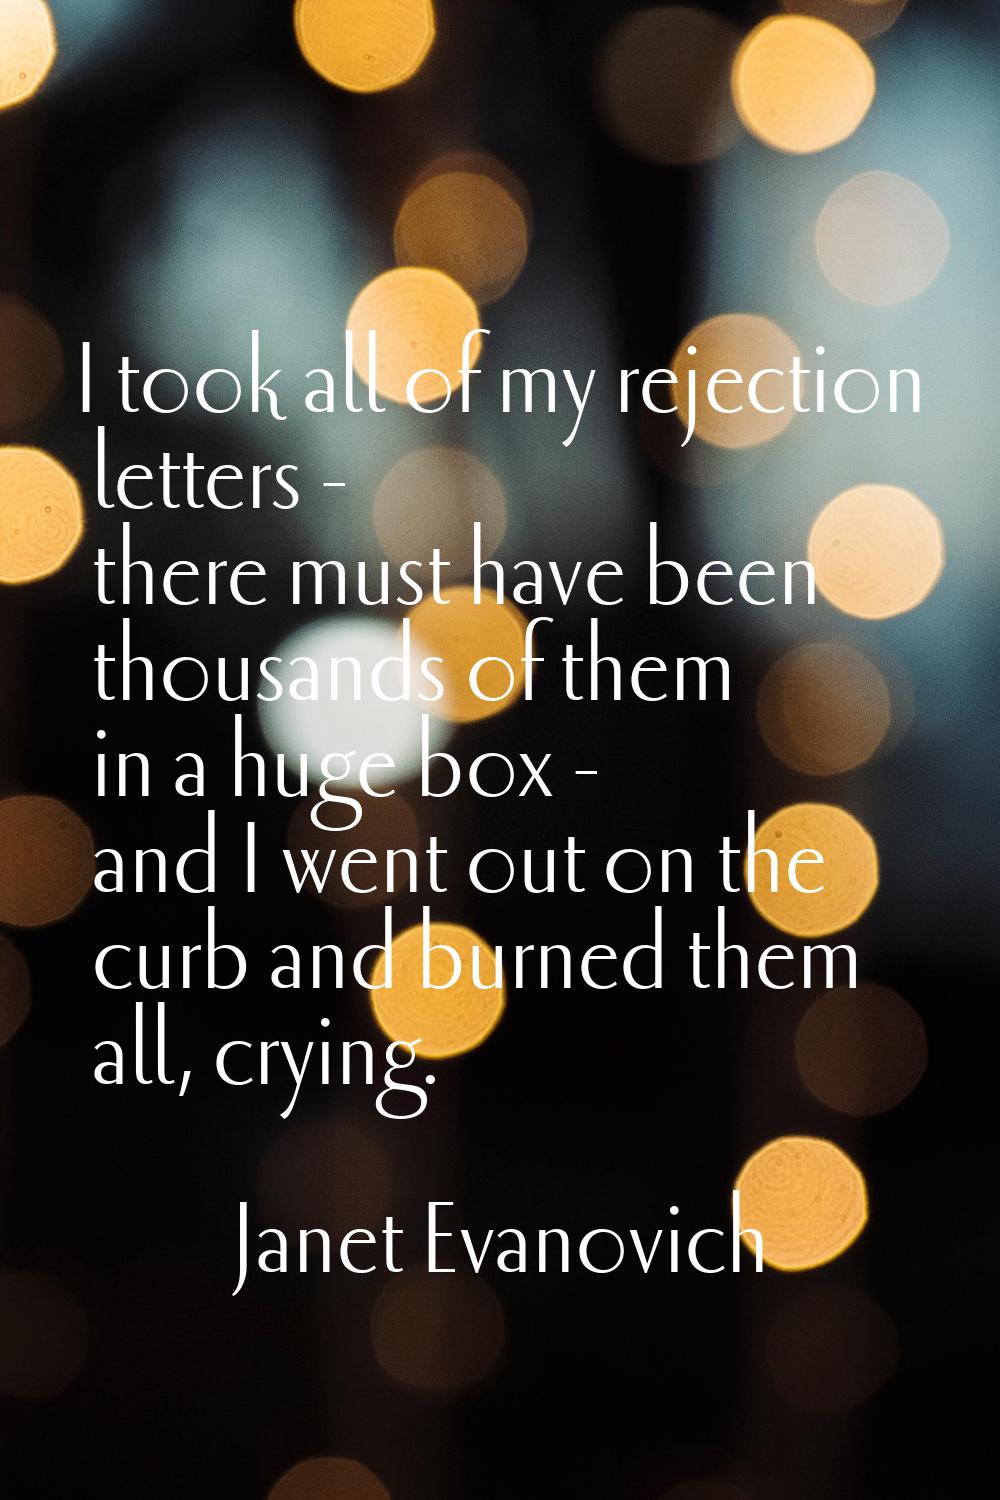 I took all of my rejection letters - there must have been thousands of them in a huge box - and I w